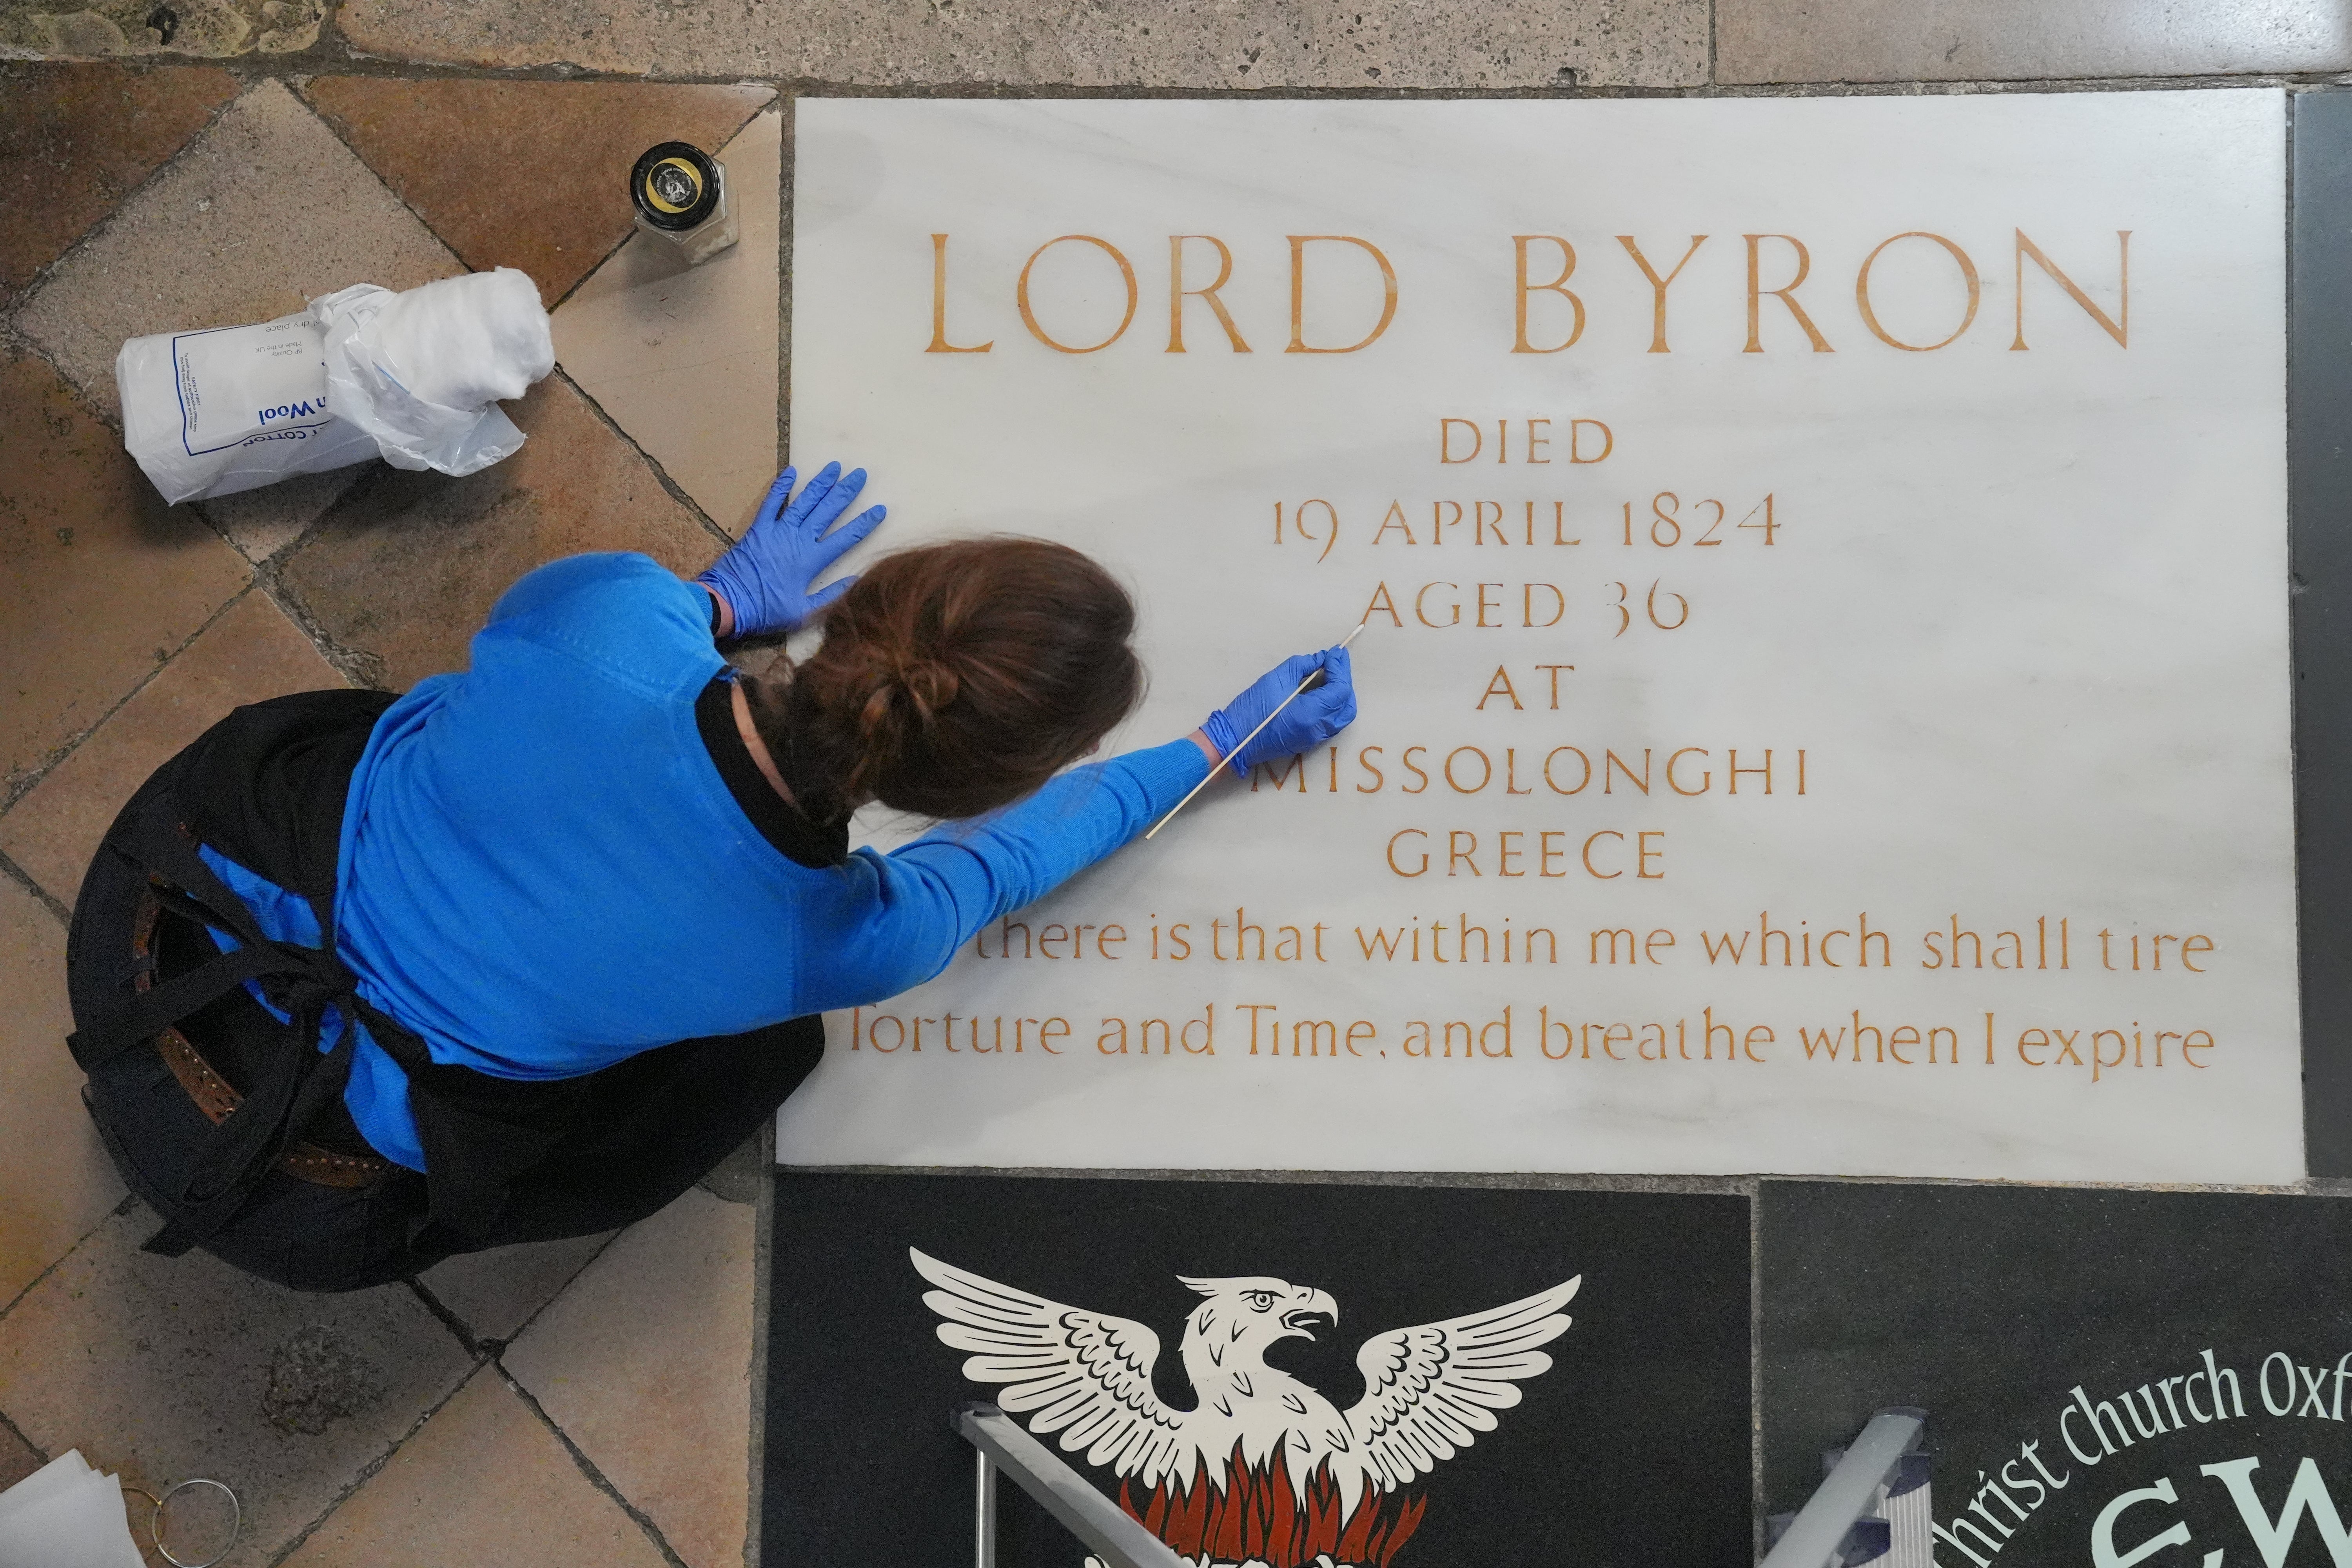 A conservator cleans Lord Byron's memorial stone in Poets' Corner at Westminster Abbey in London, ahead of the 200th anniversary of his death